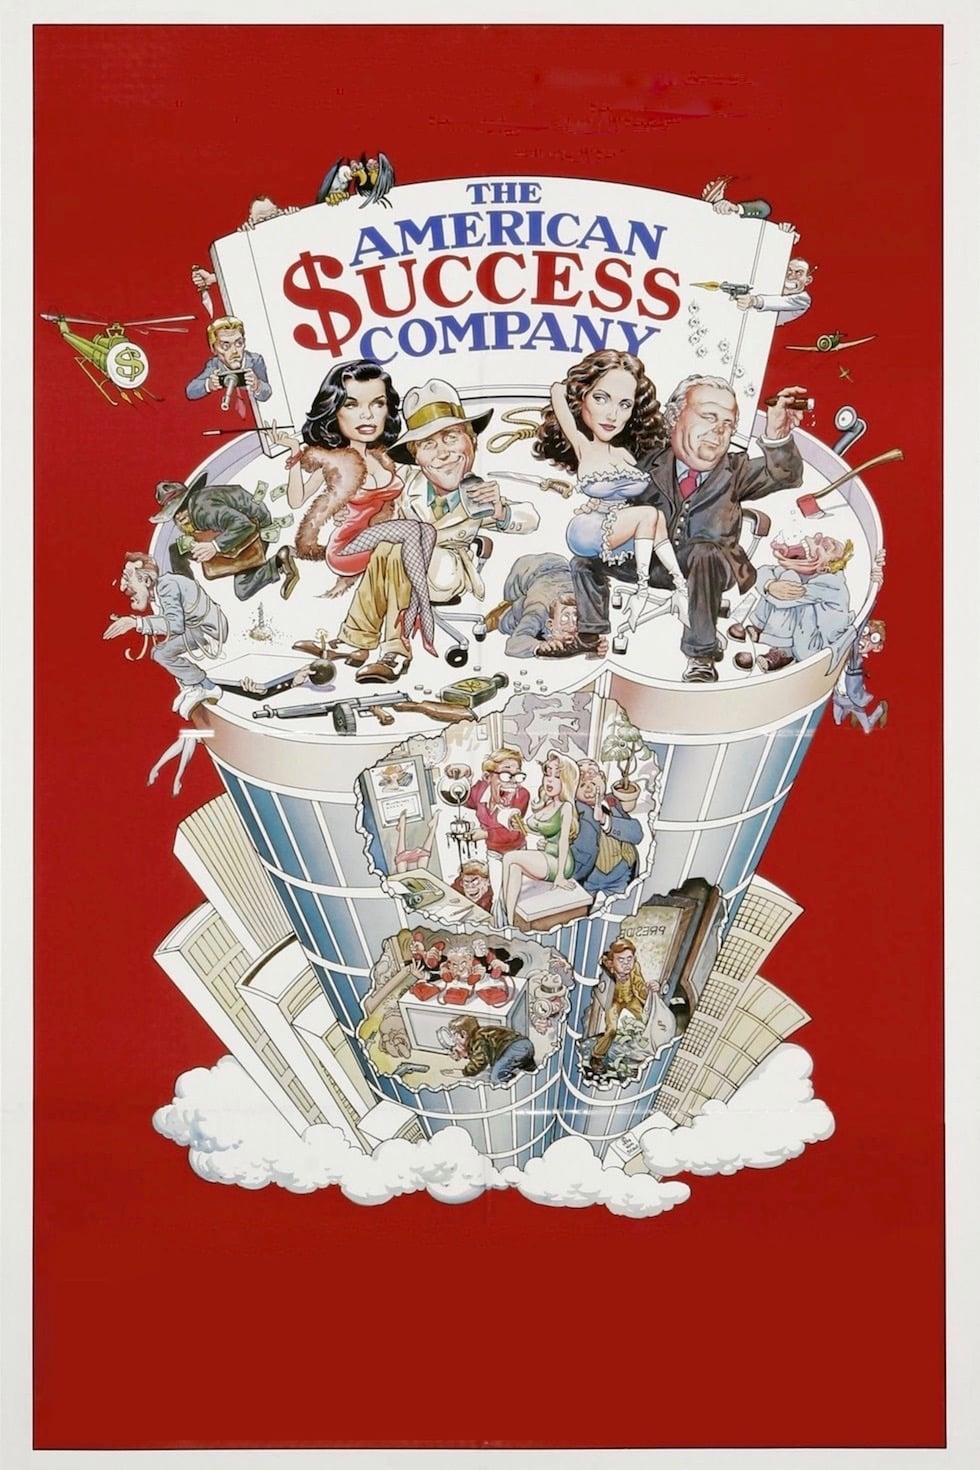 The American Success Company poster